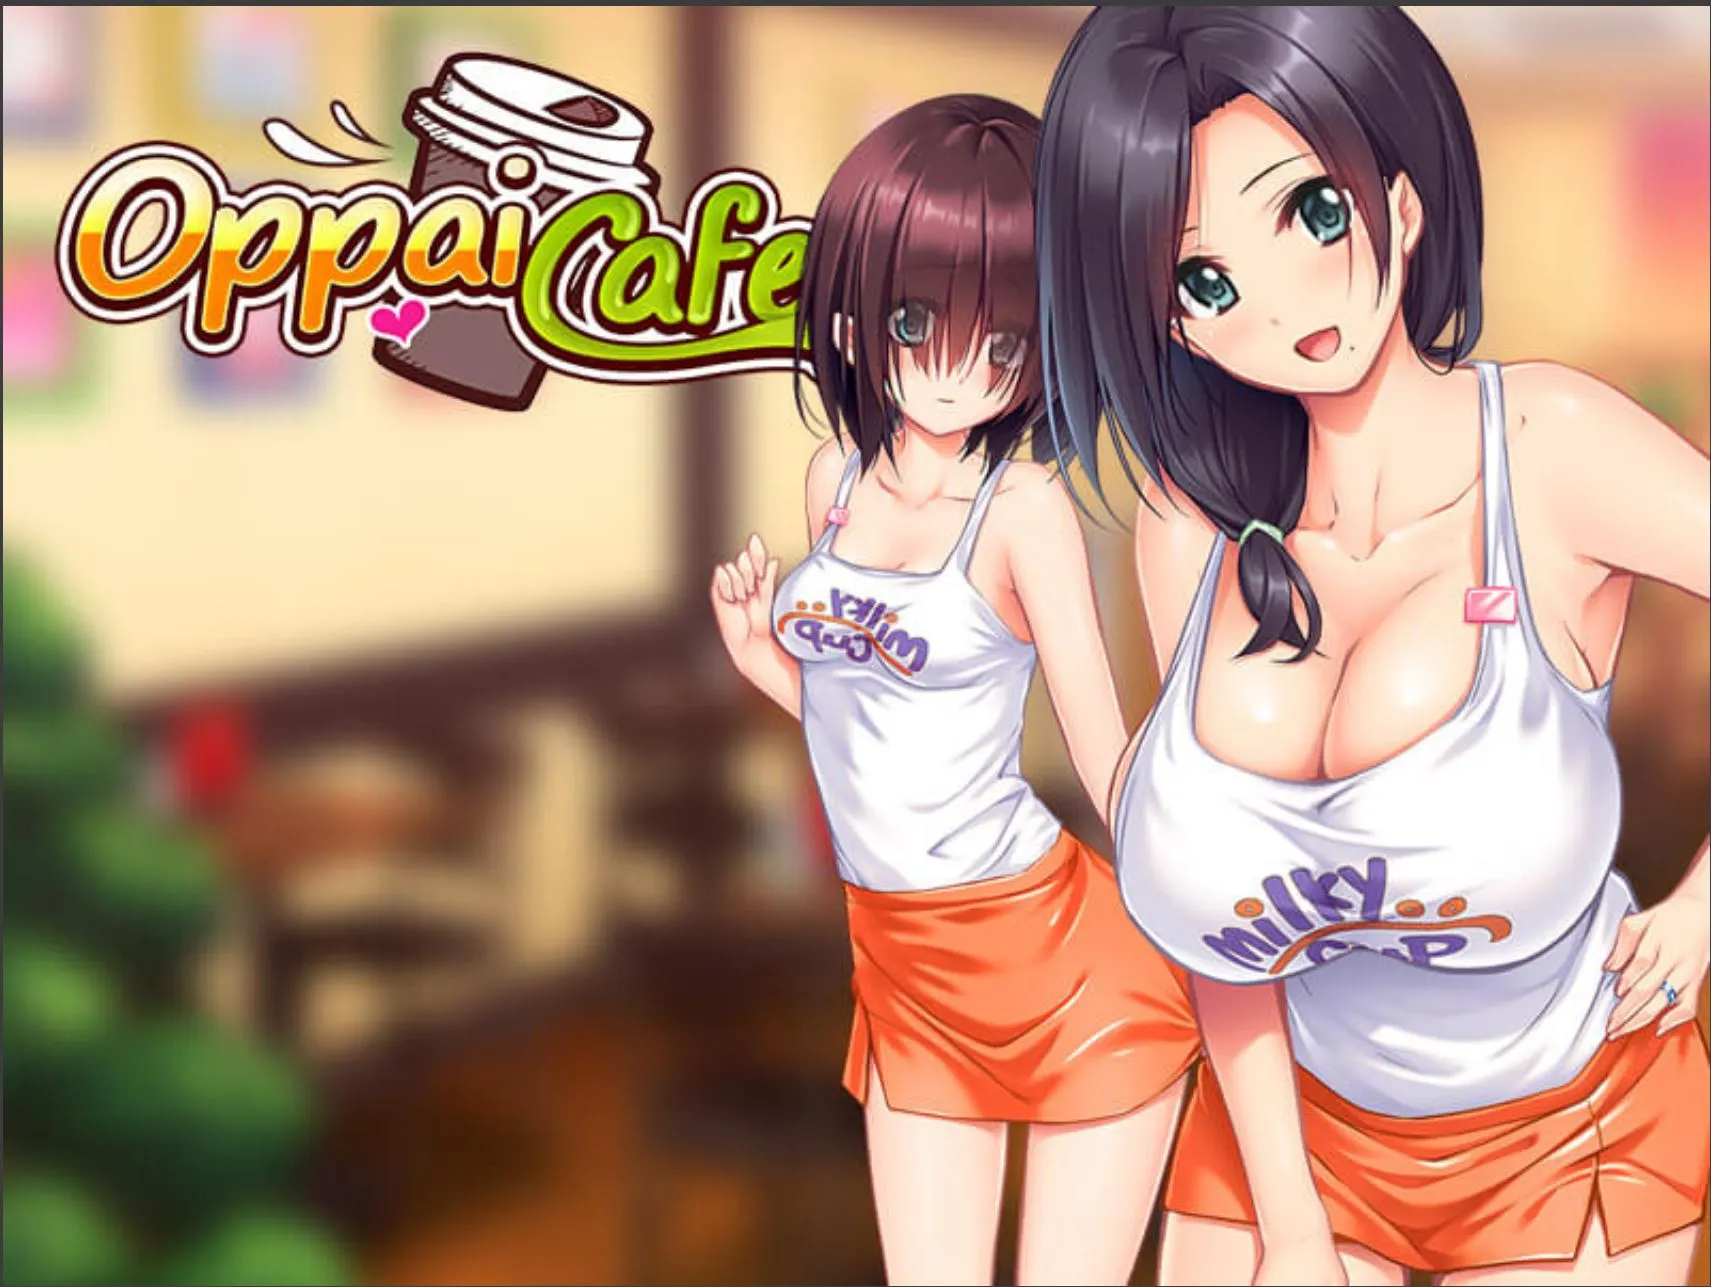 Oppaicafe: My Mother, My Sister, and Me main image